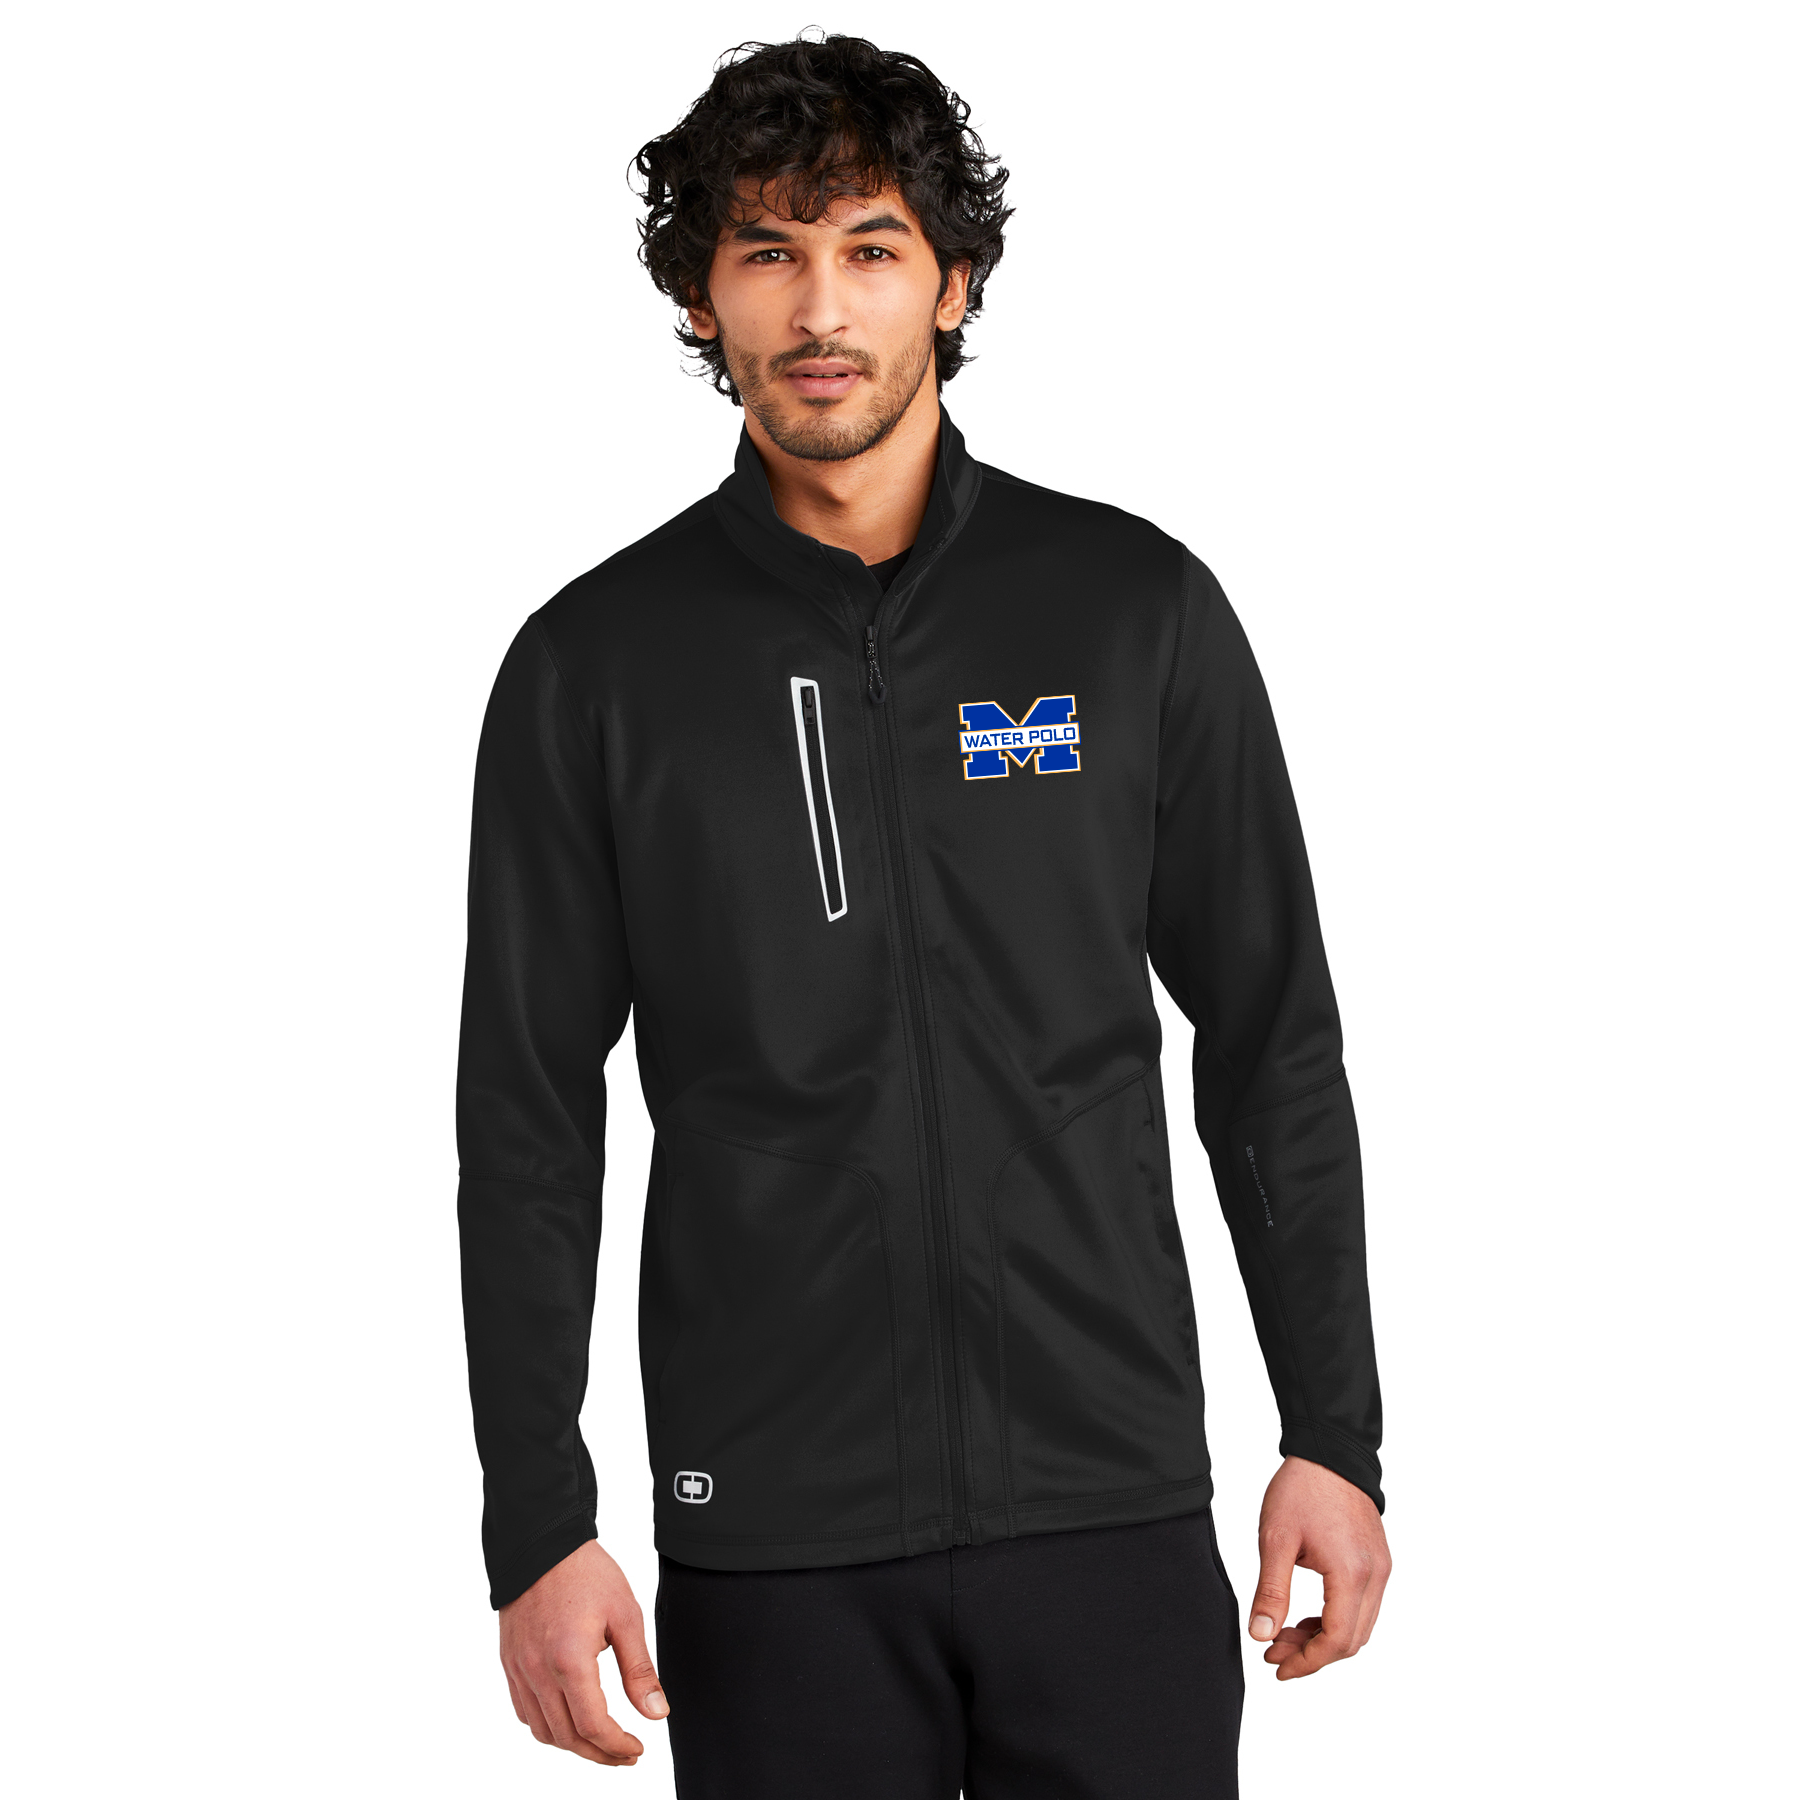 MIRA MESA WATER POLO - EMBROIDERED PERFORMANCE JACKET